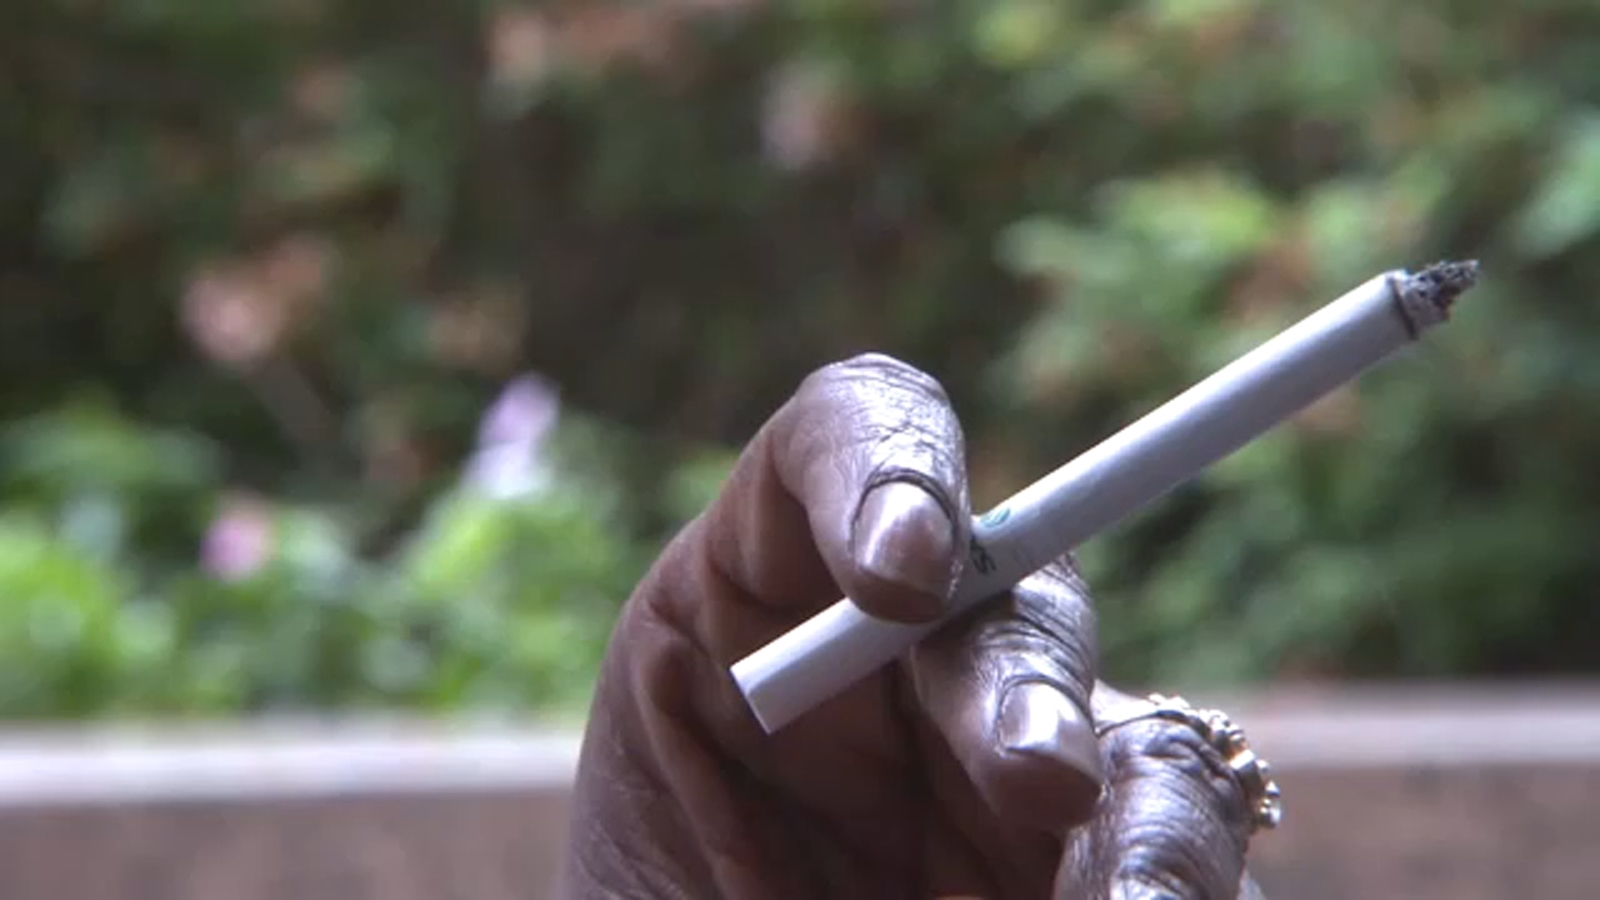 FDA sued over ‘almost unconscionable’ delay in ban on menthol tobacco products [Video]